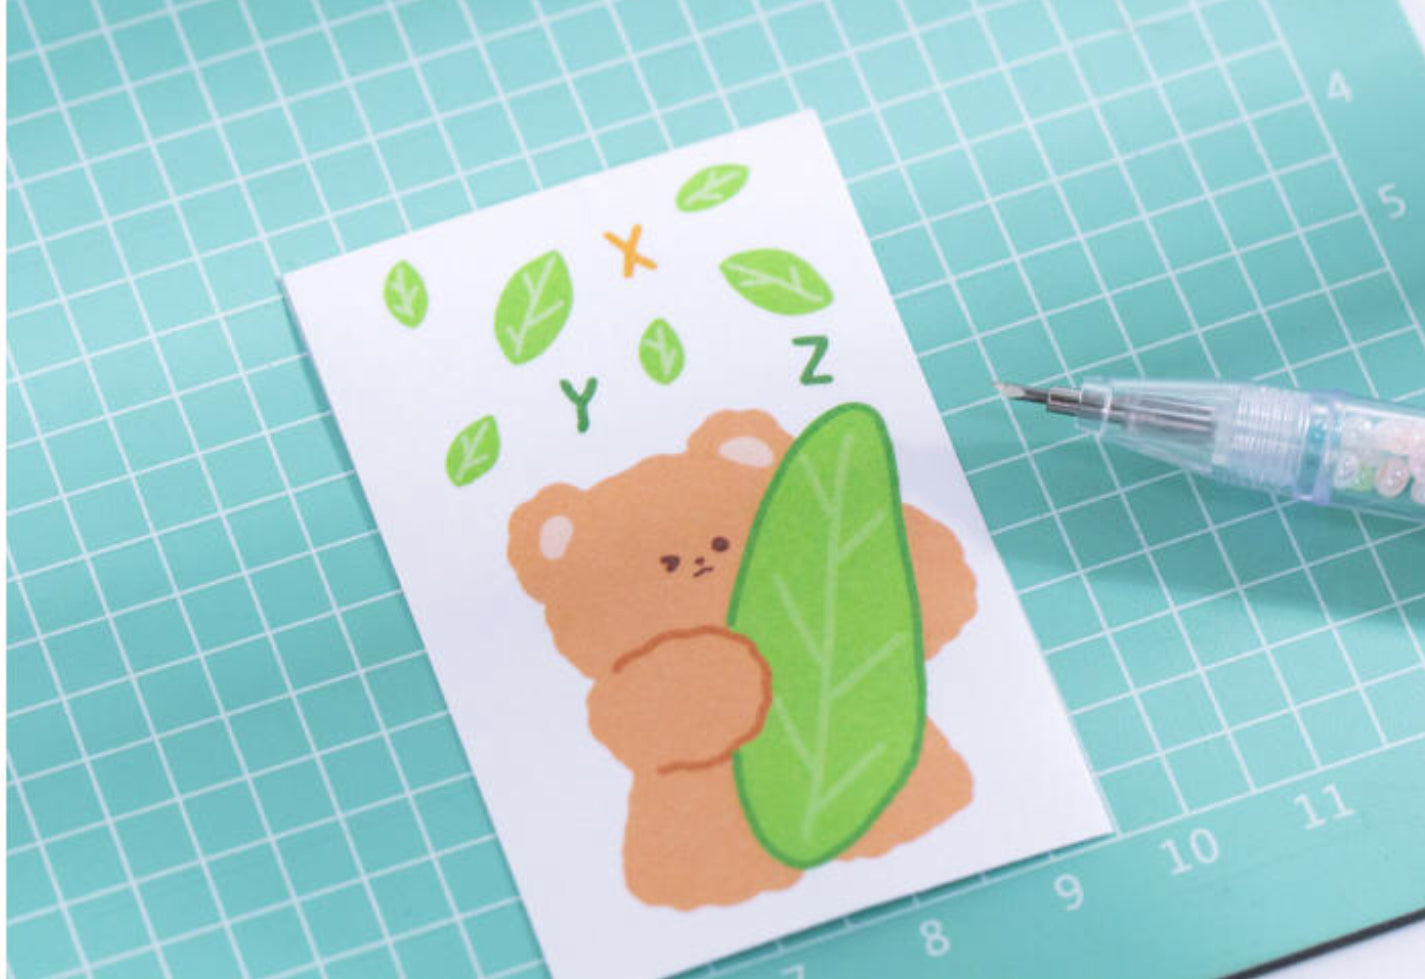 These super cute sticker books are perfect for journaling, planners, scrapbooking and more.